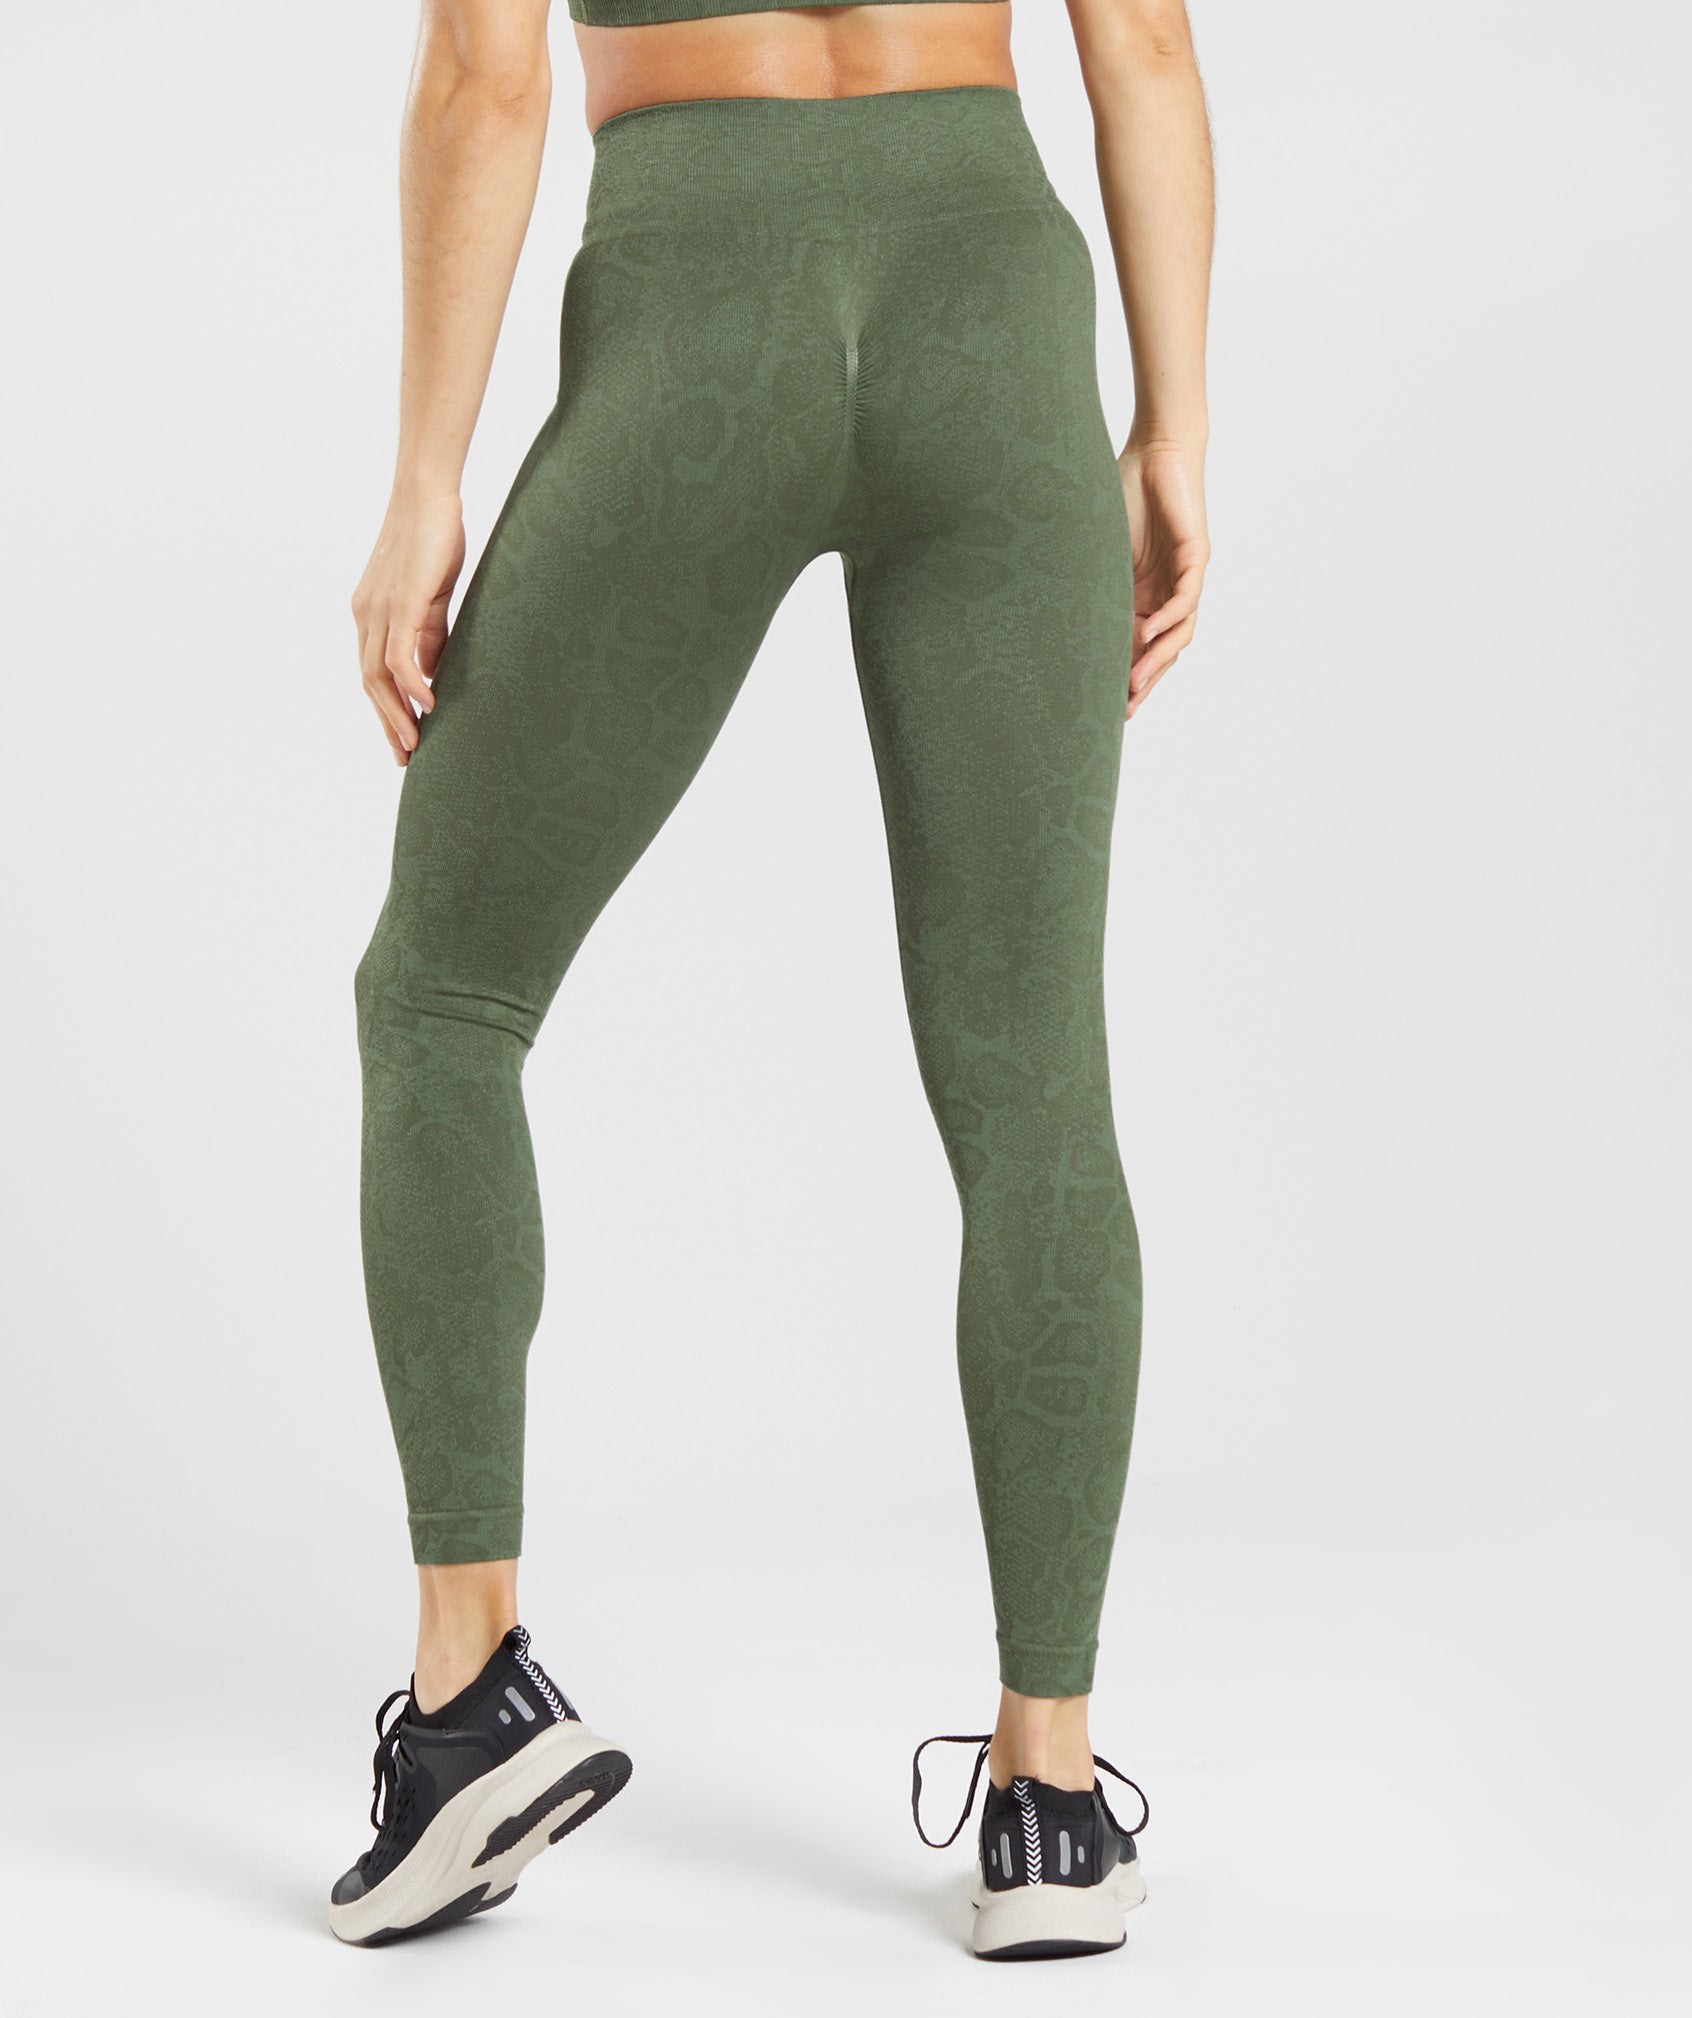 Adapt Animal Seamless Leggings in Willow Green/Core Olive